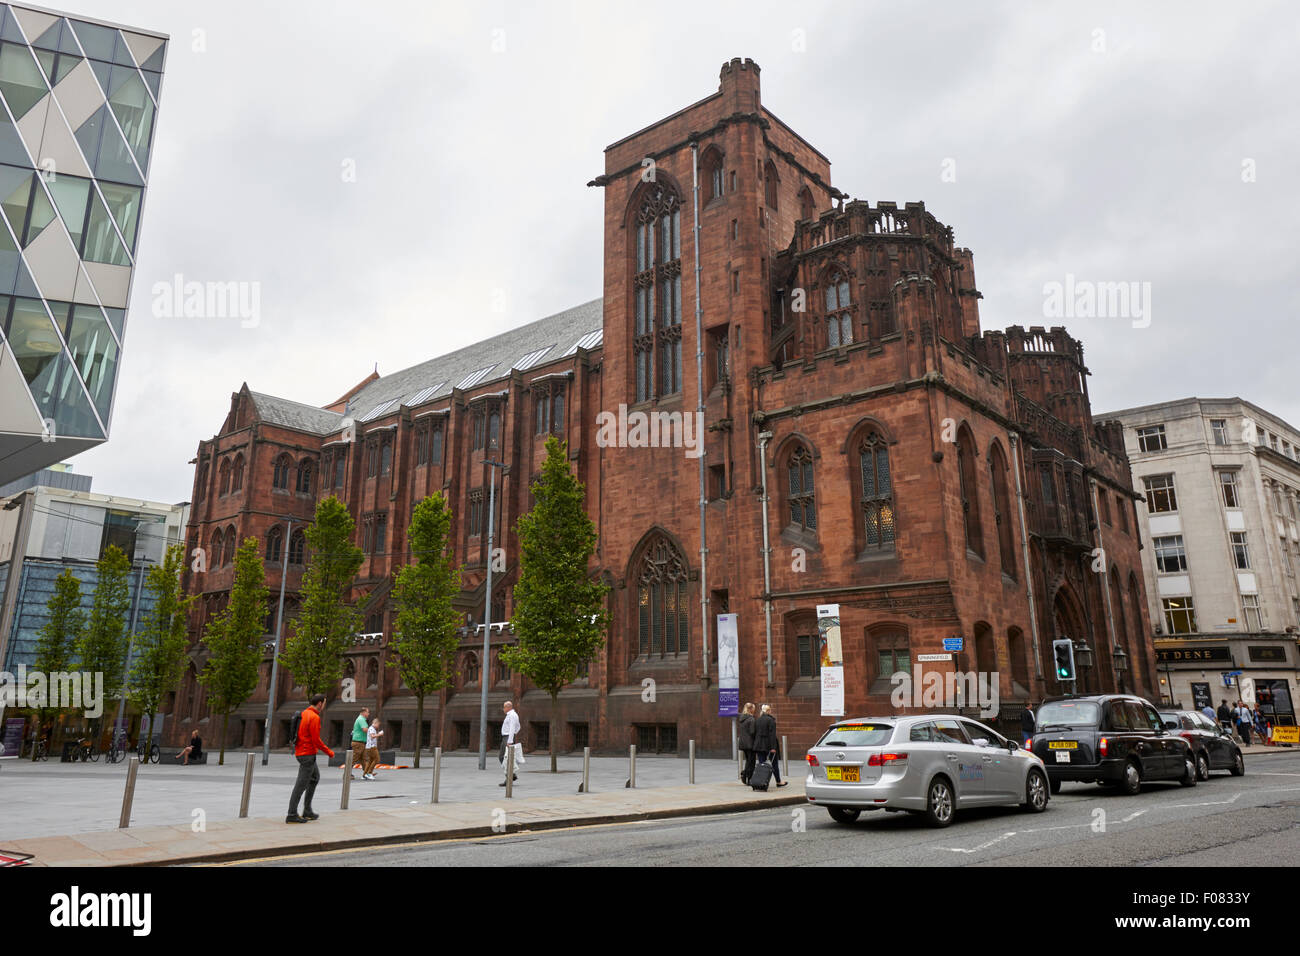 The John Rylands Library building Manchester England UK Stock Photo